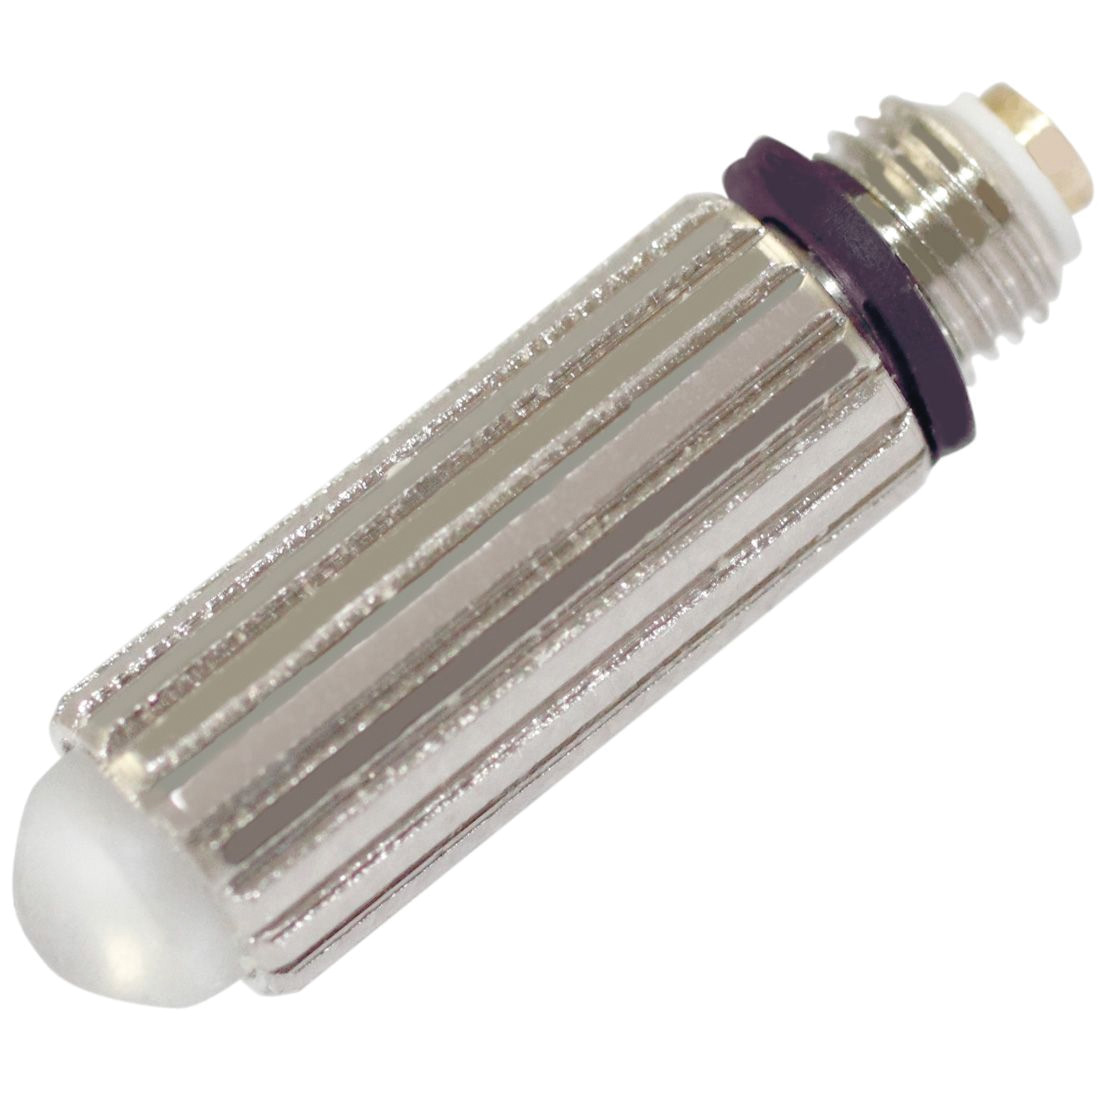 Small Kryton Replacement Bulb (for use with Standard Miller Blades - Sizes 00, 0 and 1)